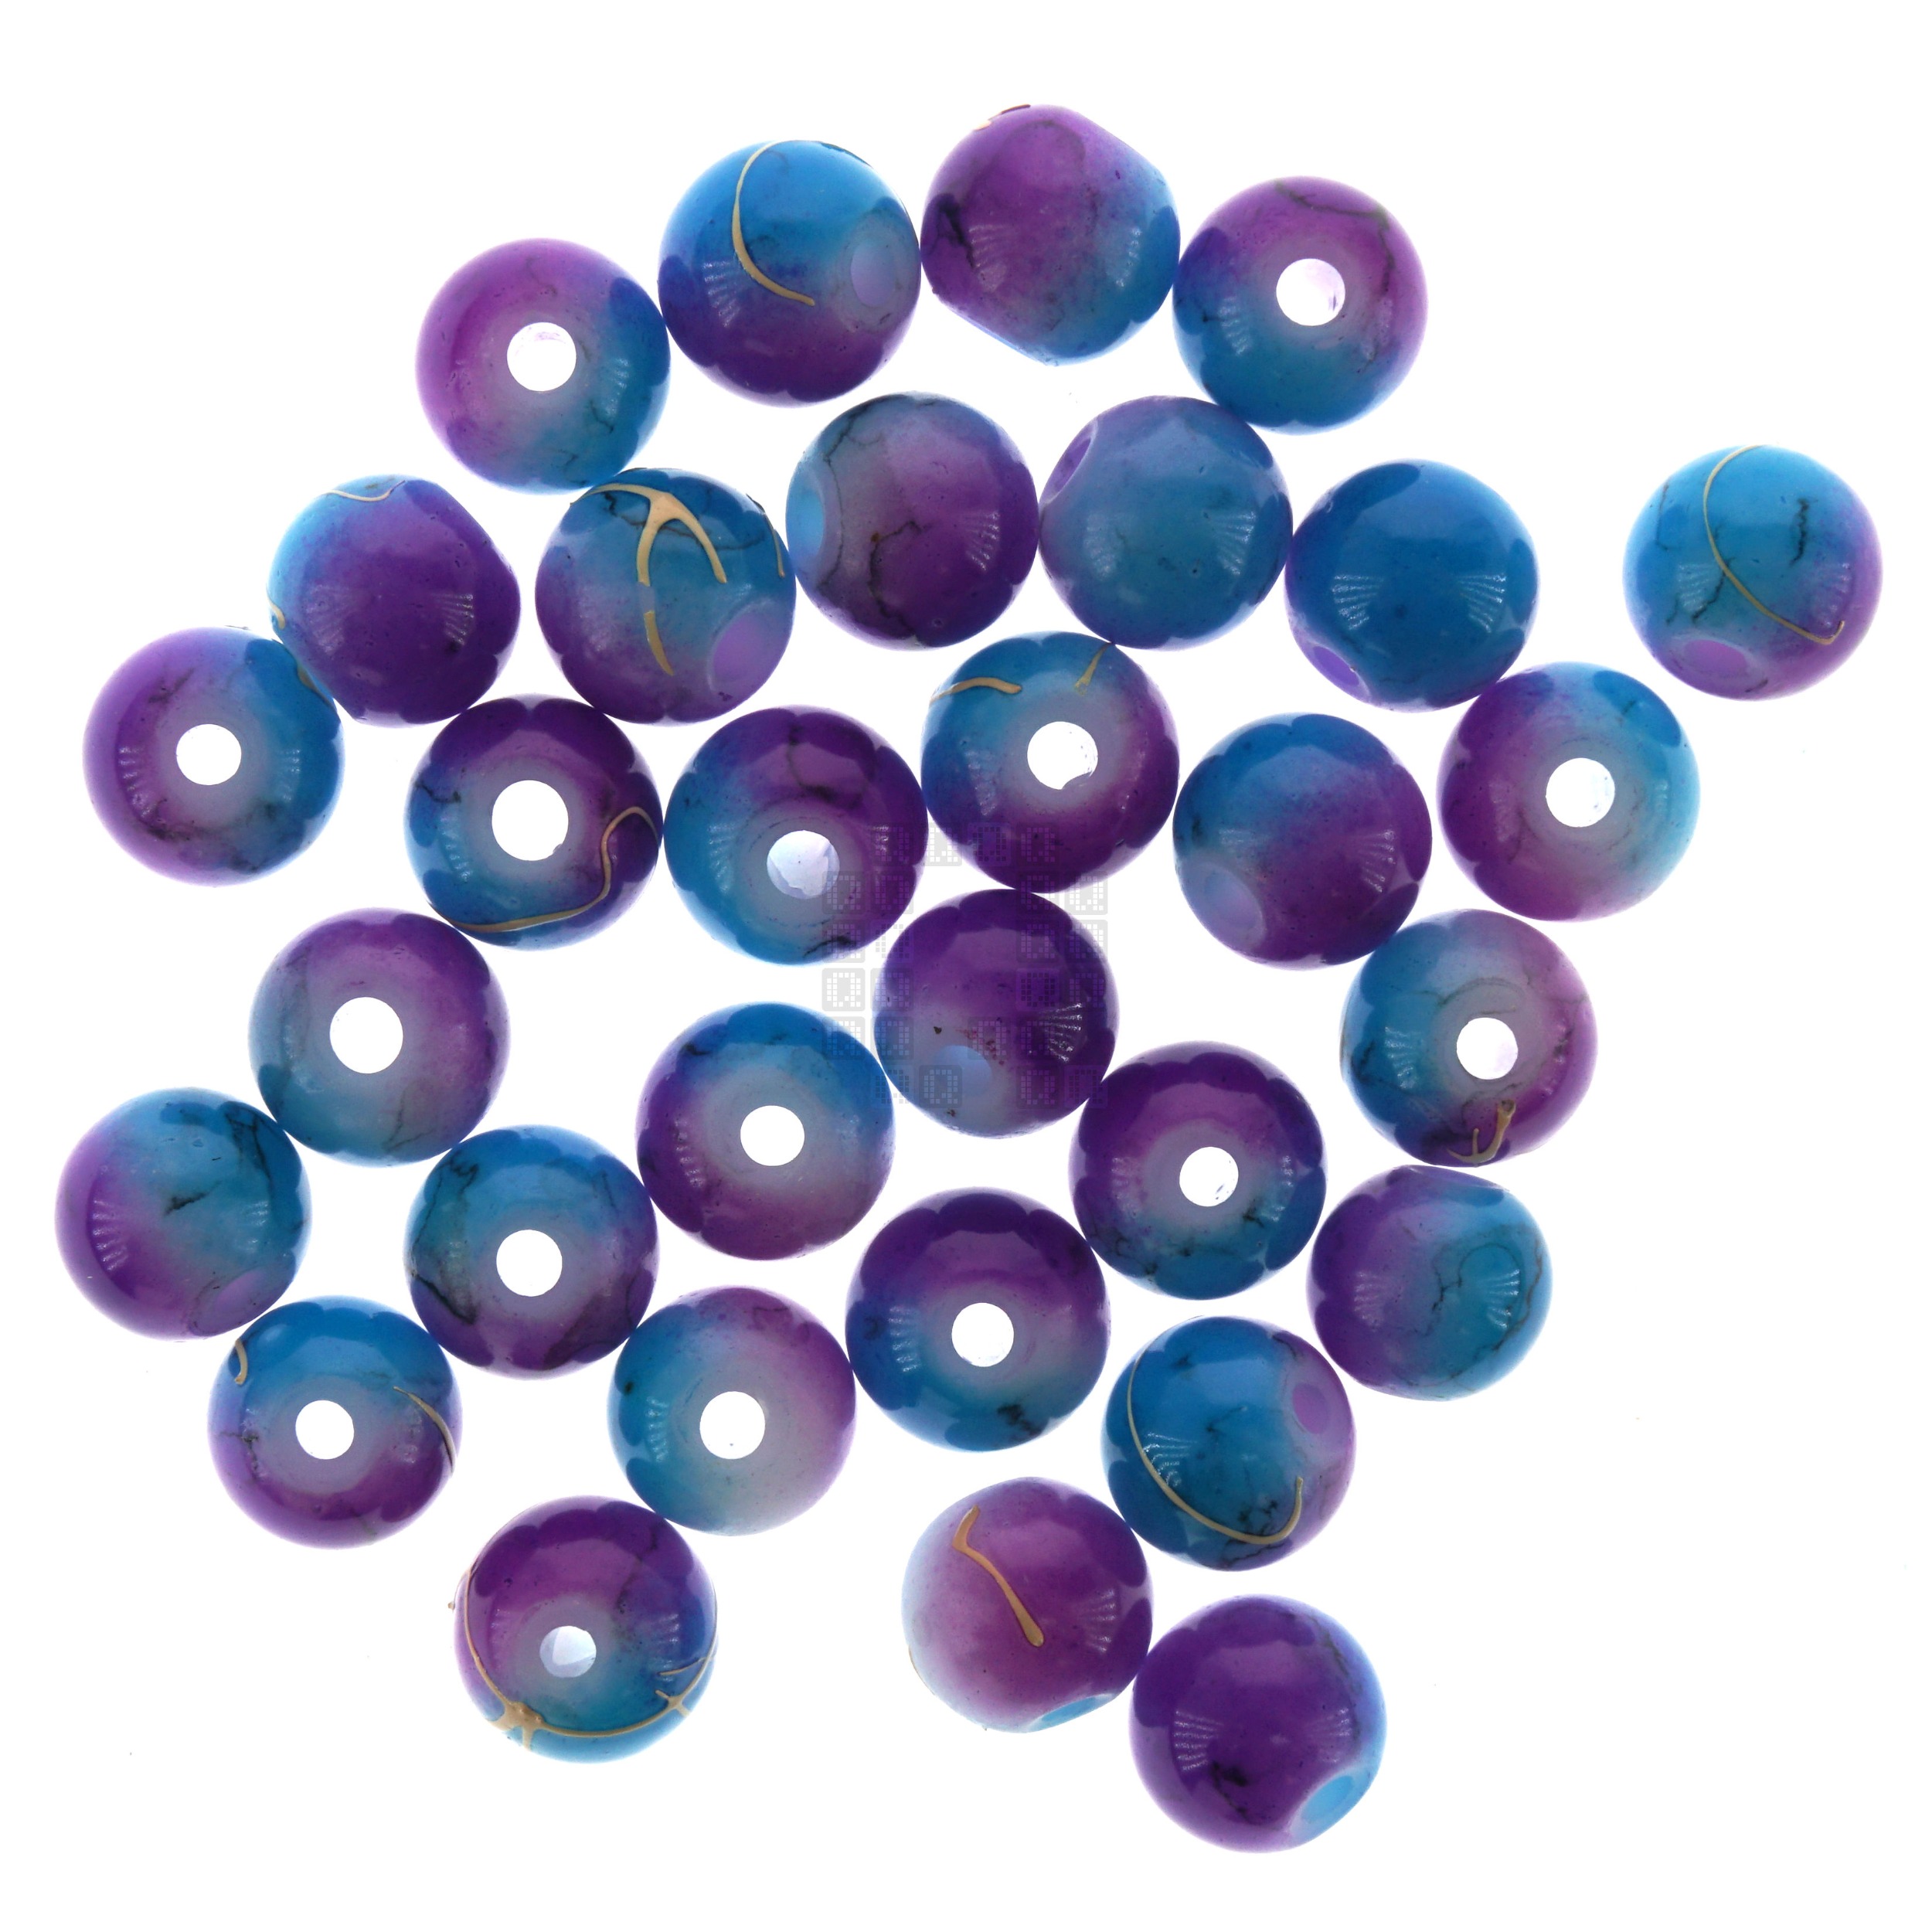 Universe 8mm Loose Glass Beads, 30 Pieces